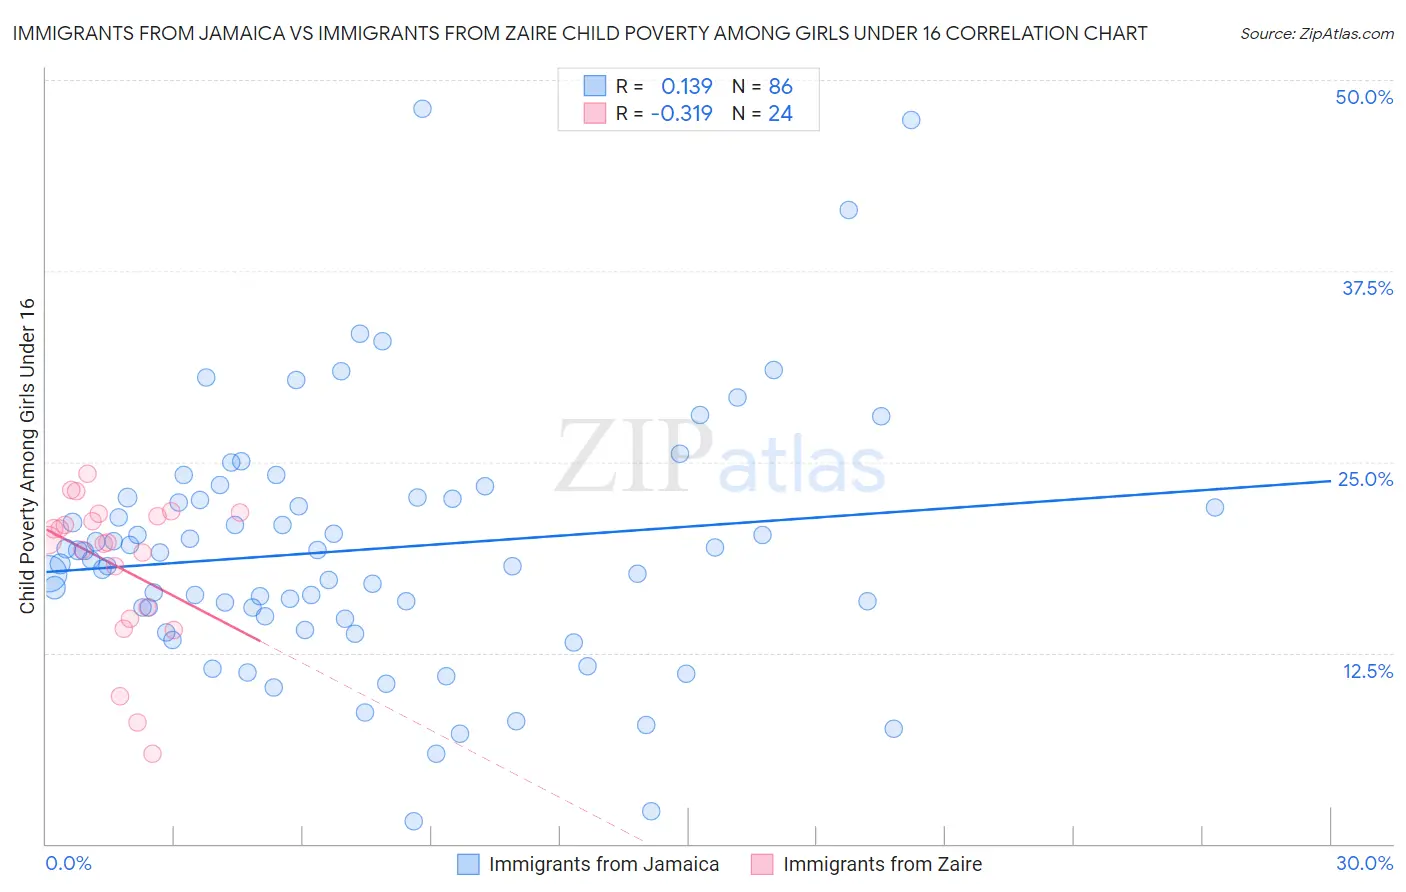 Immigrants from Jamaica vs Immigrants from Zaire Child Poverty Among Girls Under 16